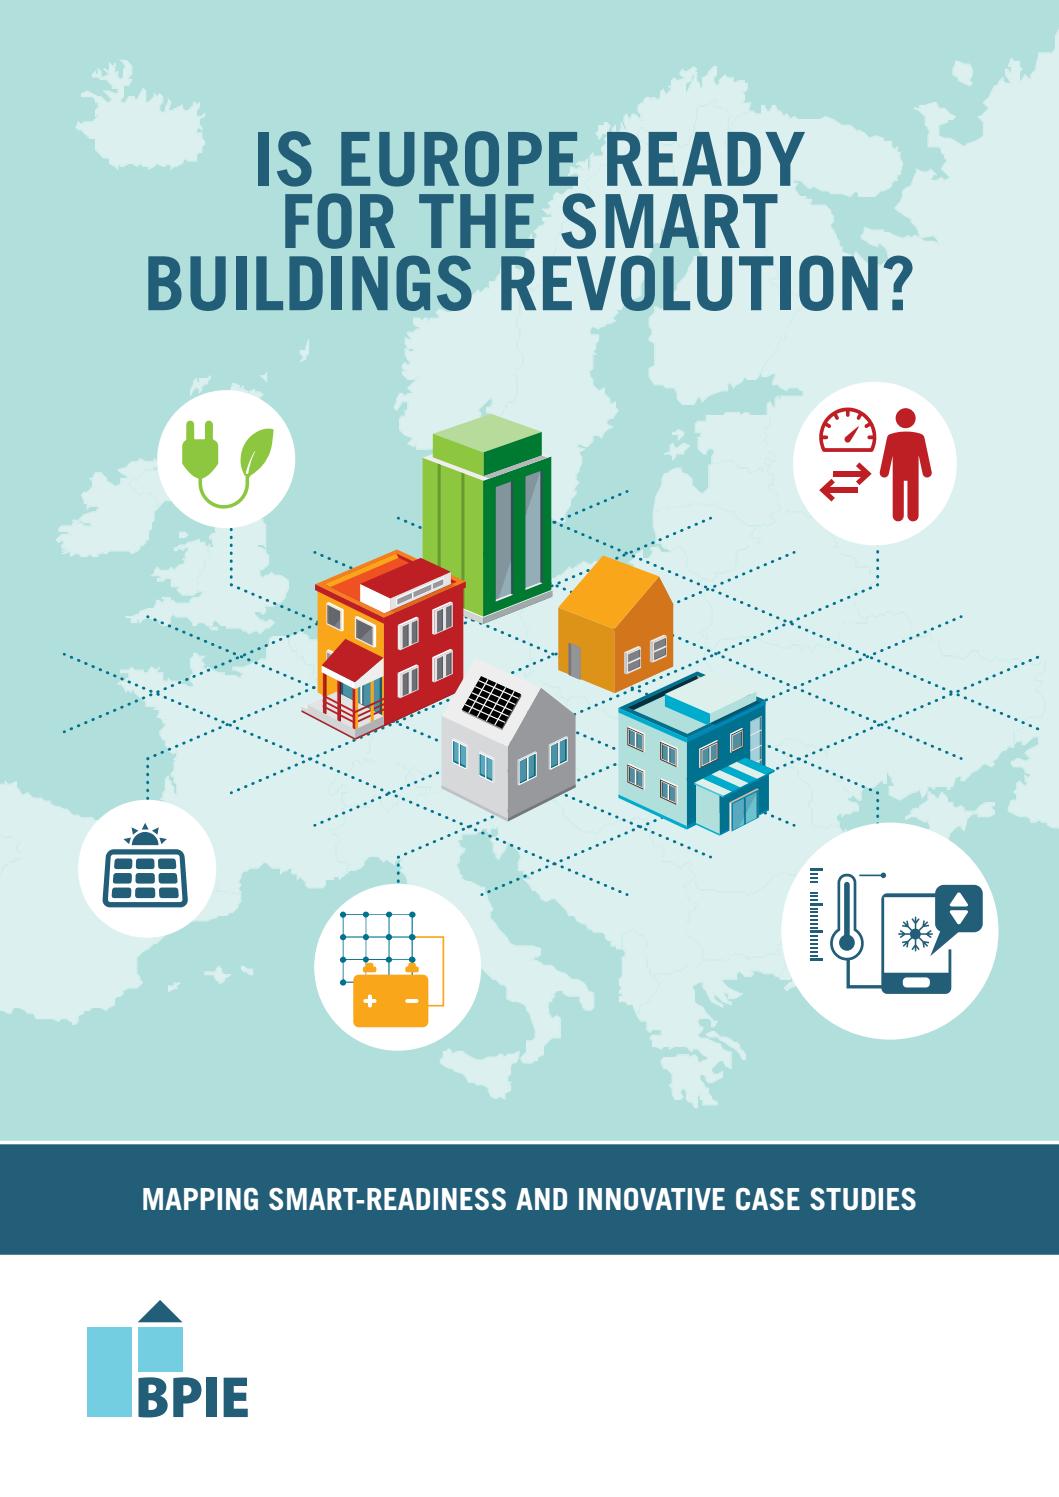 European countries are missing smart buildings opportunities